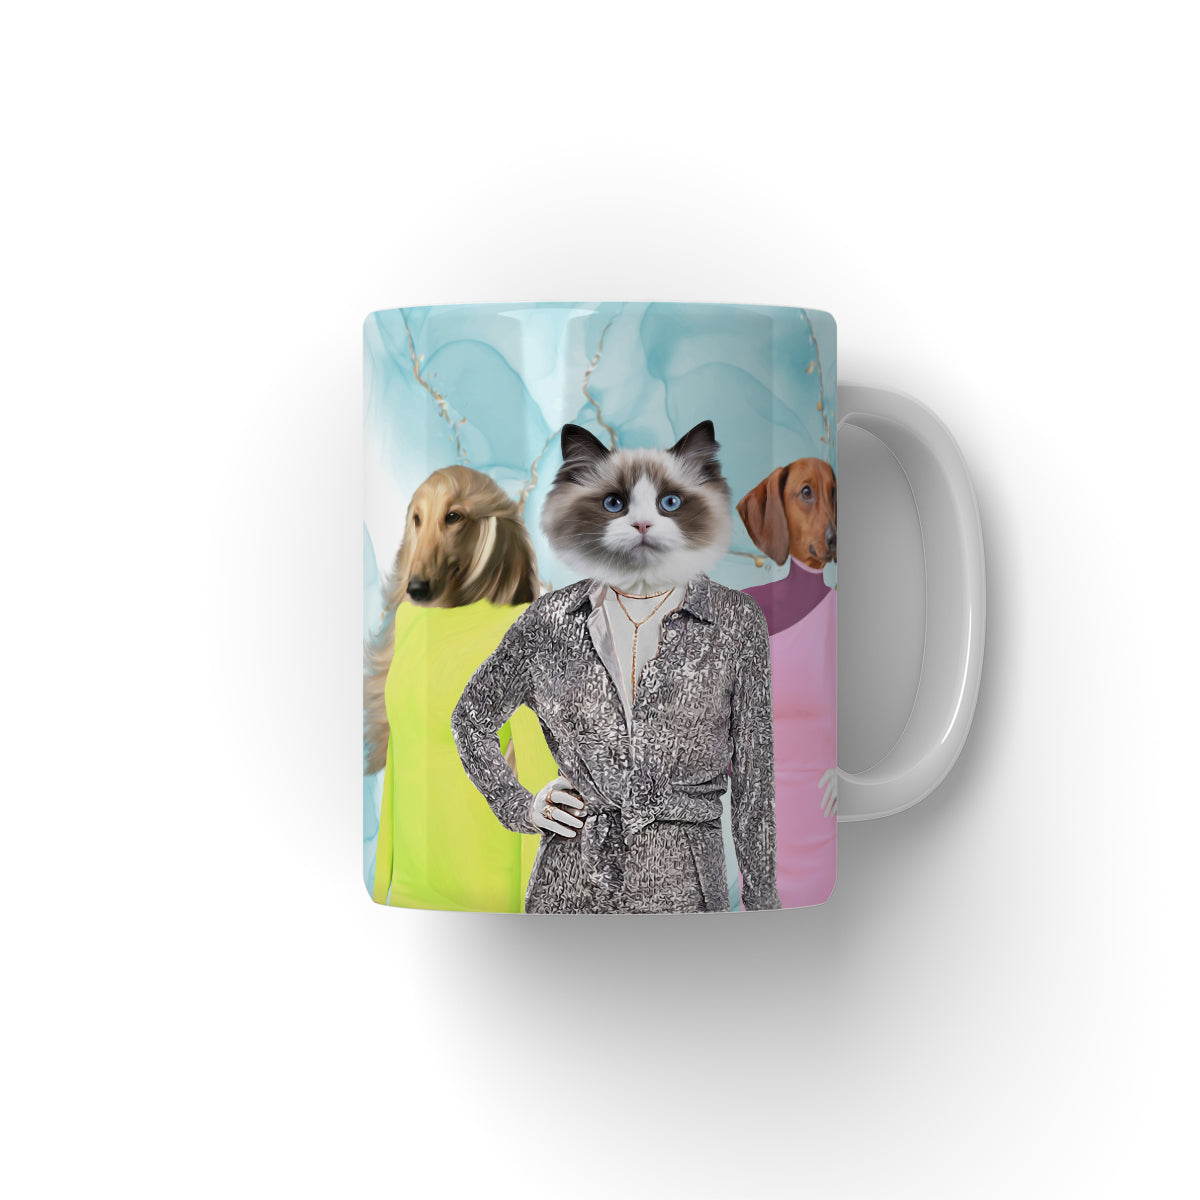 paw and glory,
 pawandglory,
 dog and cat paintings,
 portrait of pet from photo,
 print of your dog,
 paw prints gifts,
 puppy mug,
 dog and cat mug